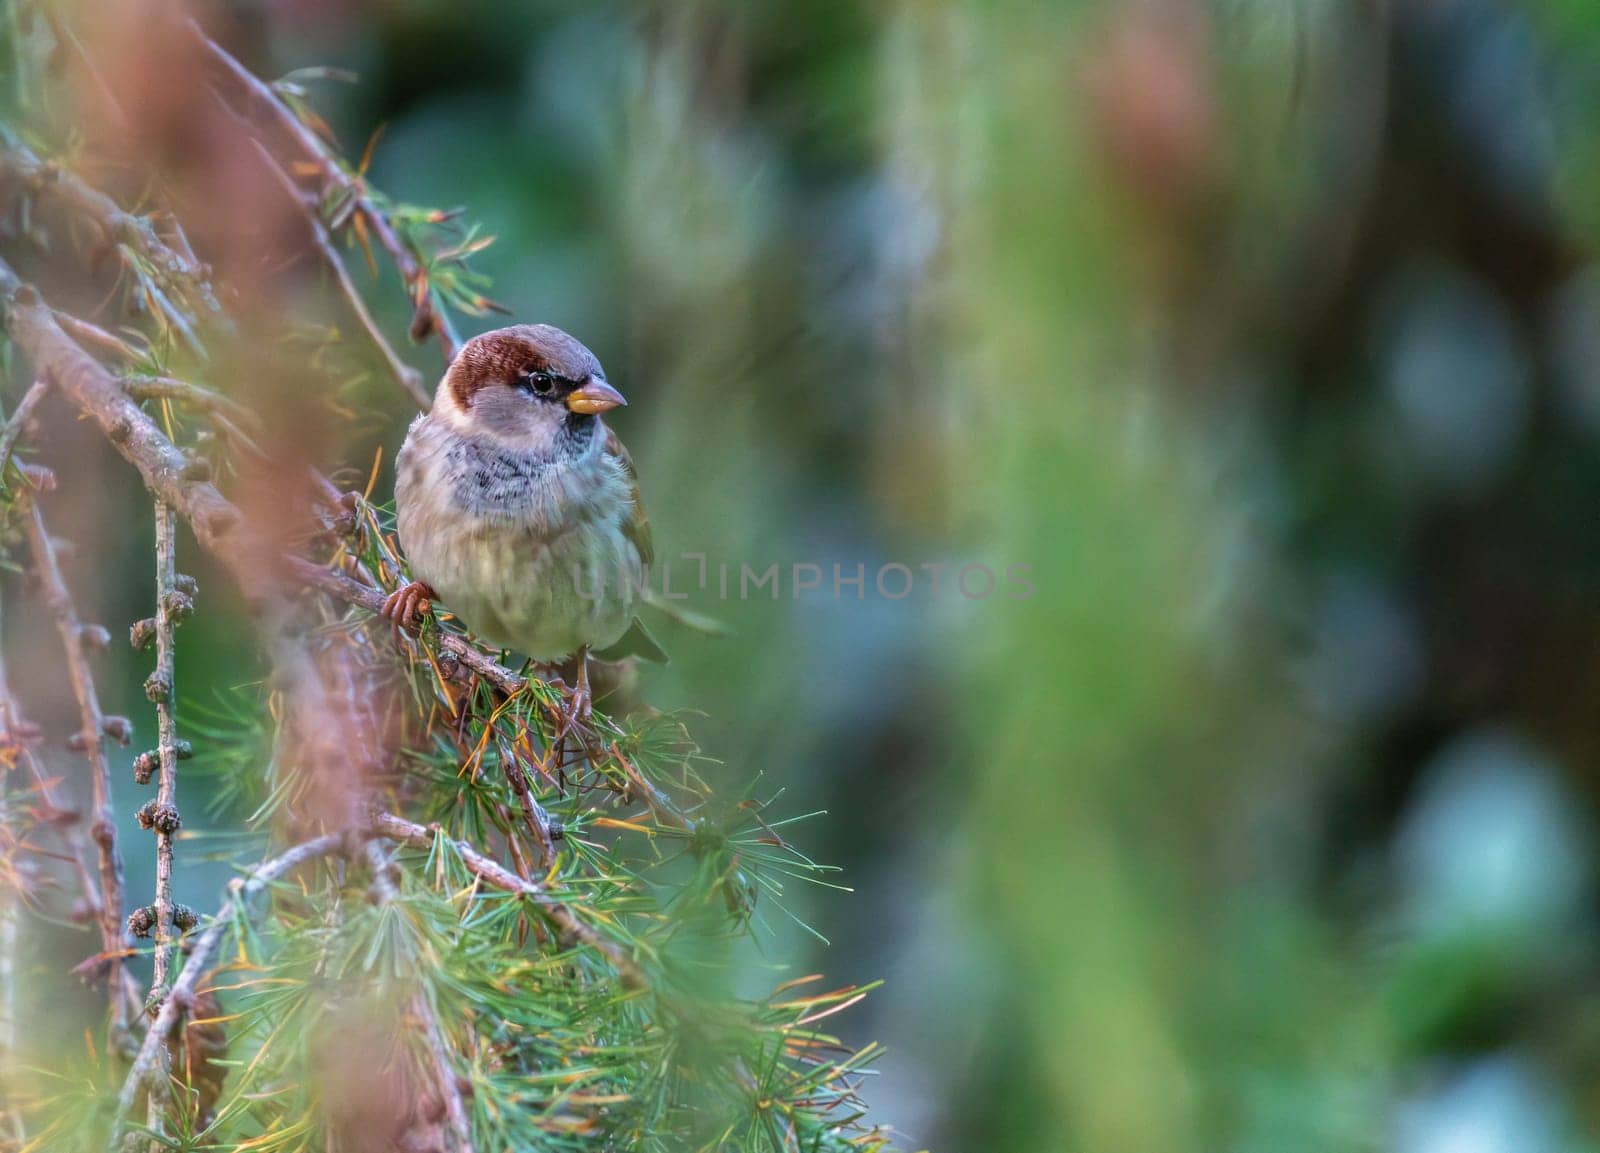 Male sparrow, passer domesticus, standing on a branch looking aside by Elenaphotos21